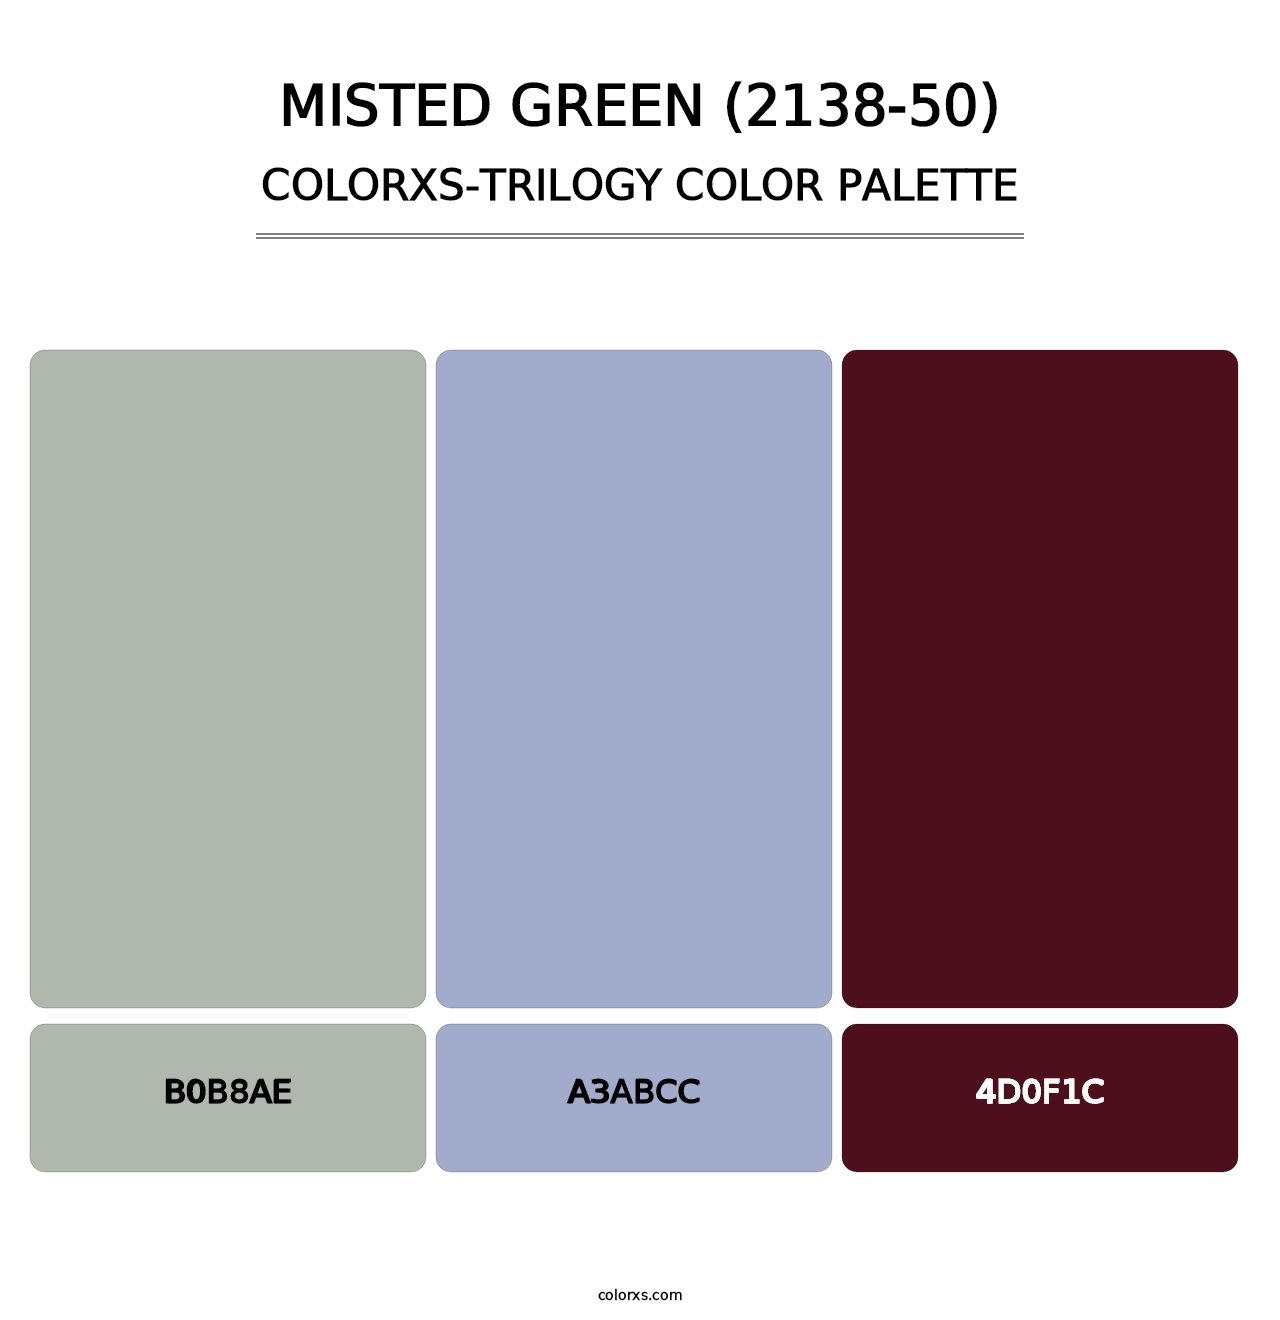 Misted Green (2138-50) - Colorxs Trilogy Palette